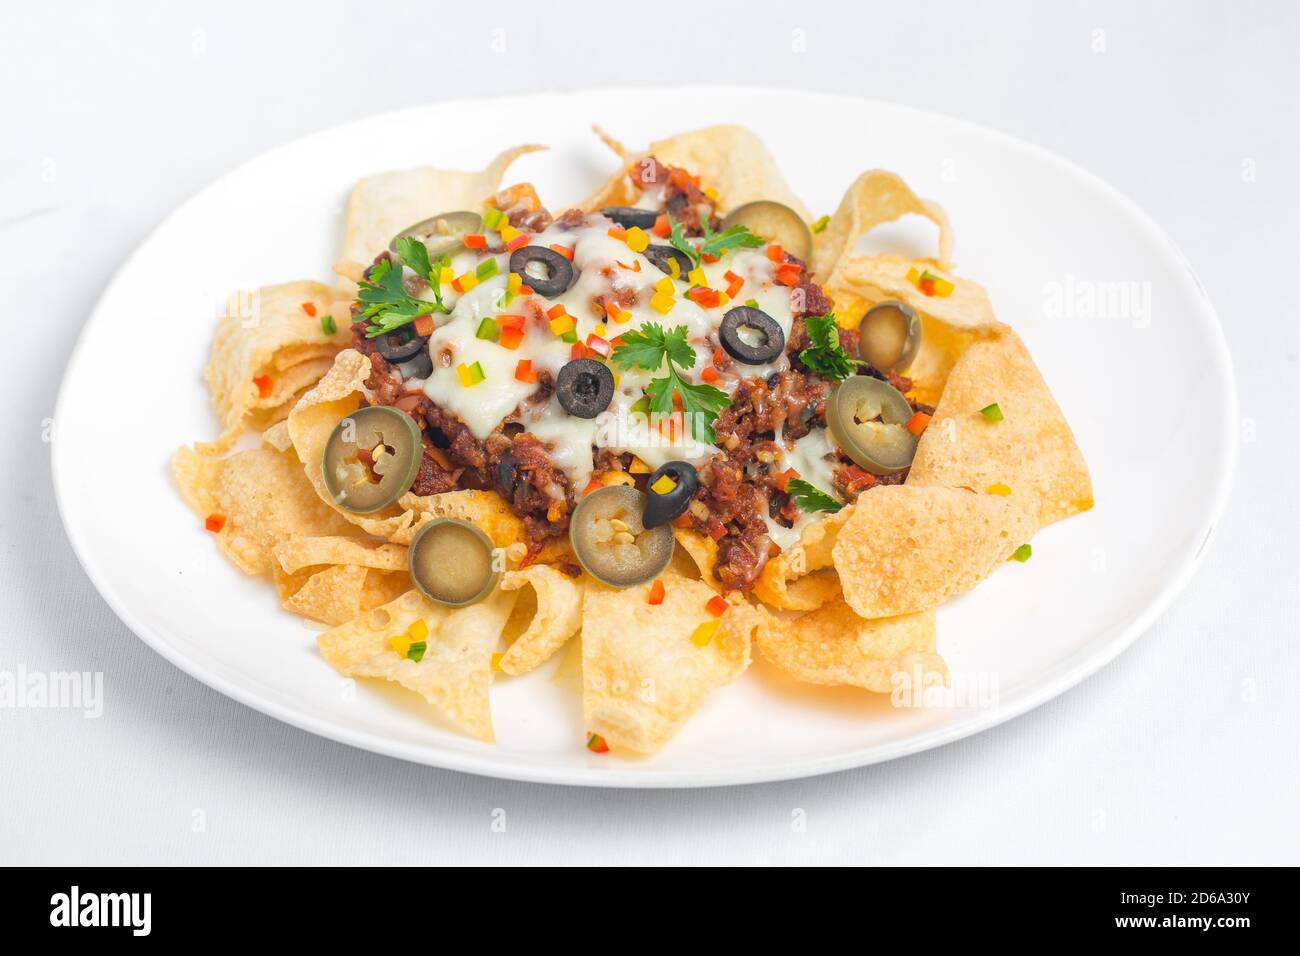 Mexican Famous Food Spicy Ground Beef Nachos. Heated crunchy tortilla chips with melted cheese and jalapeno served a snack food. Stock Photo